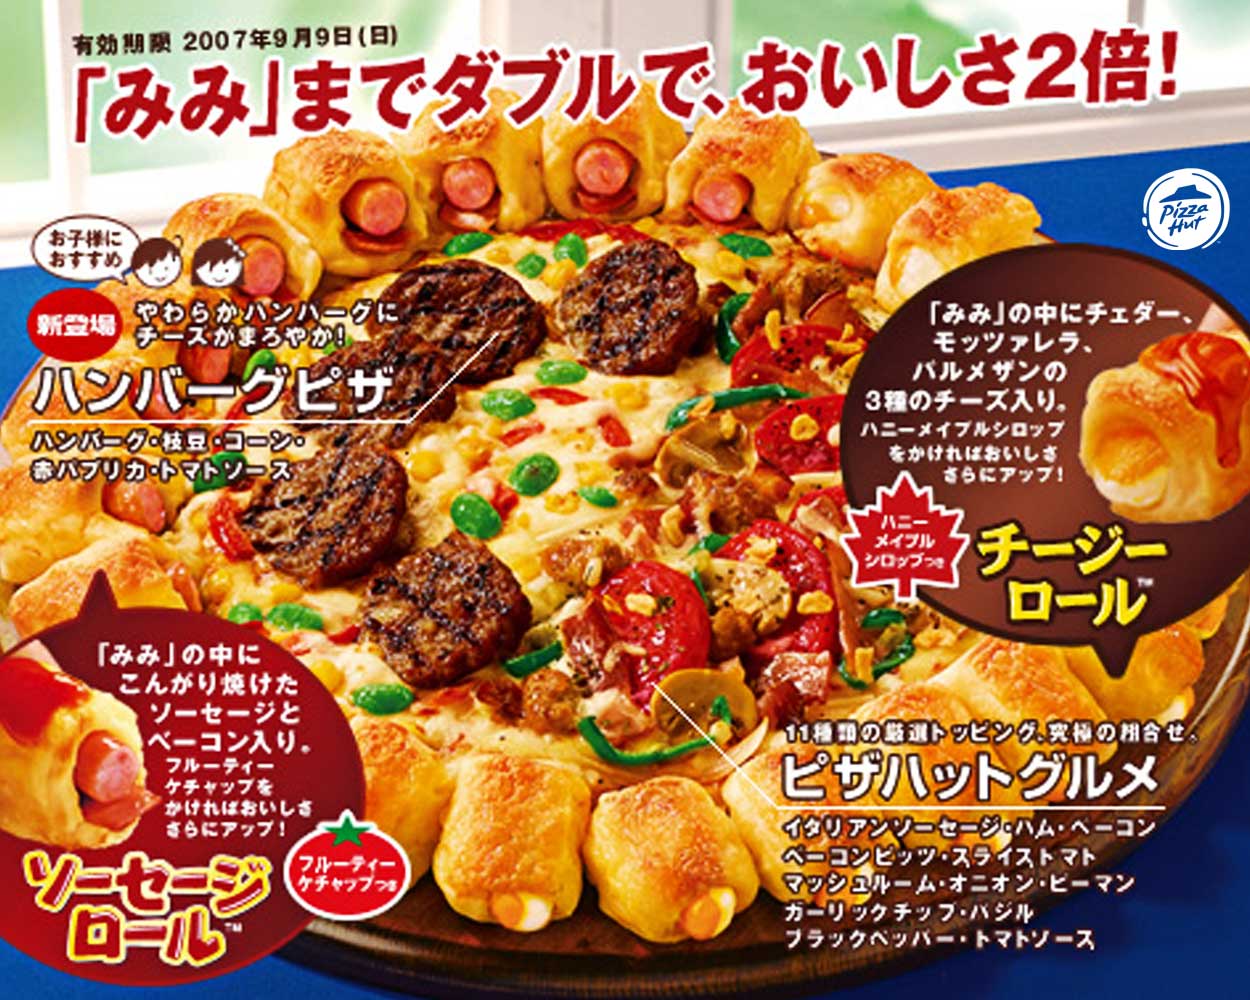 Japan'S Pizza Hut Double Roll Pizza